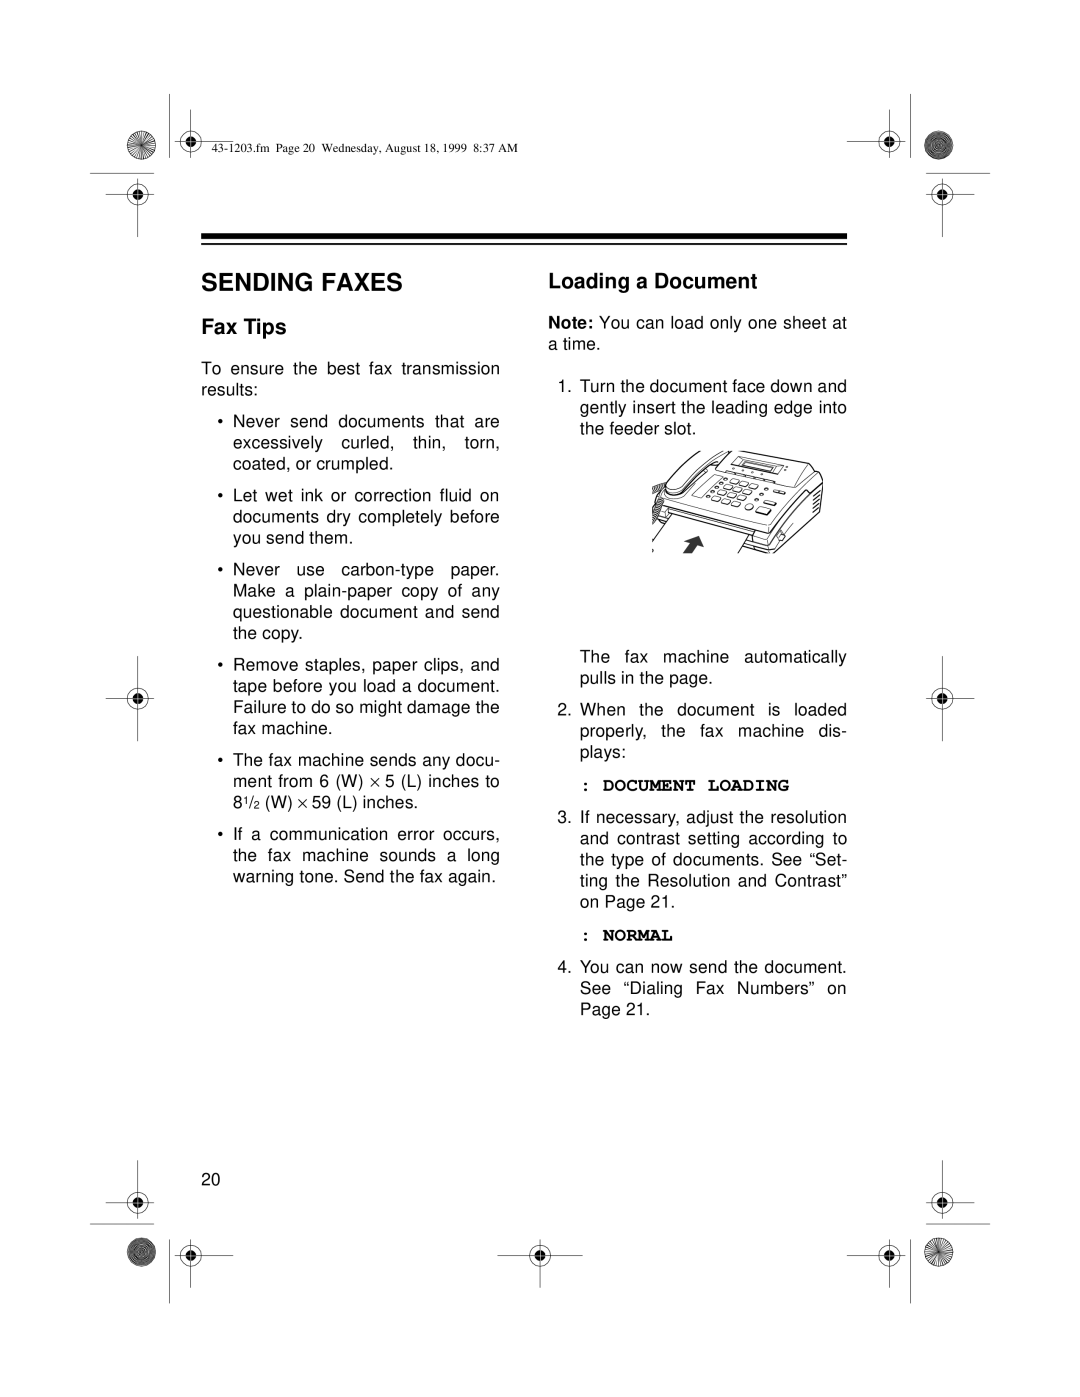 Radio Shack TFX-1031 owner manual Sending Faxes, Fax Tips, Loading a Document, Normal, Document Loading 